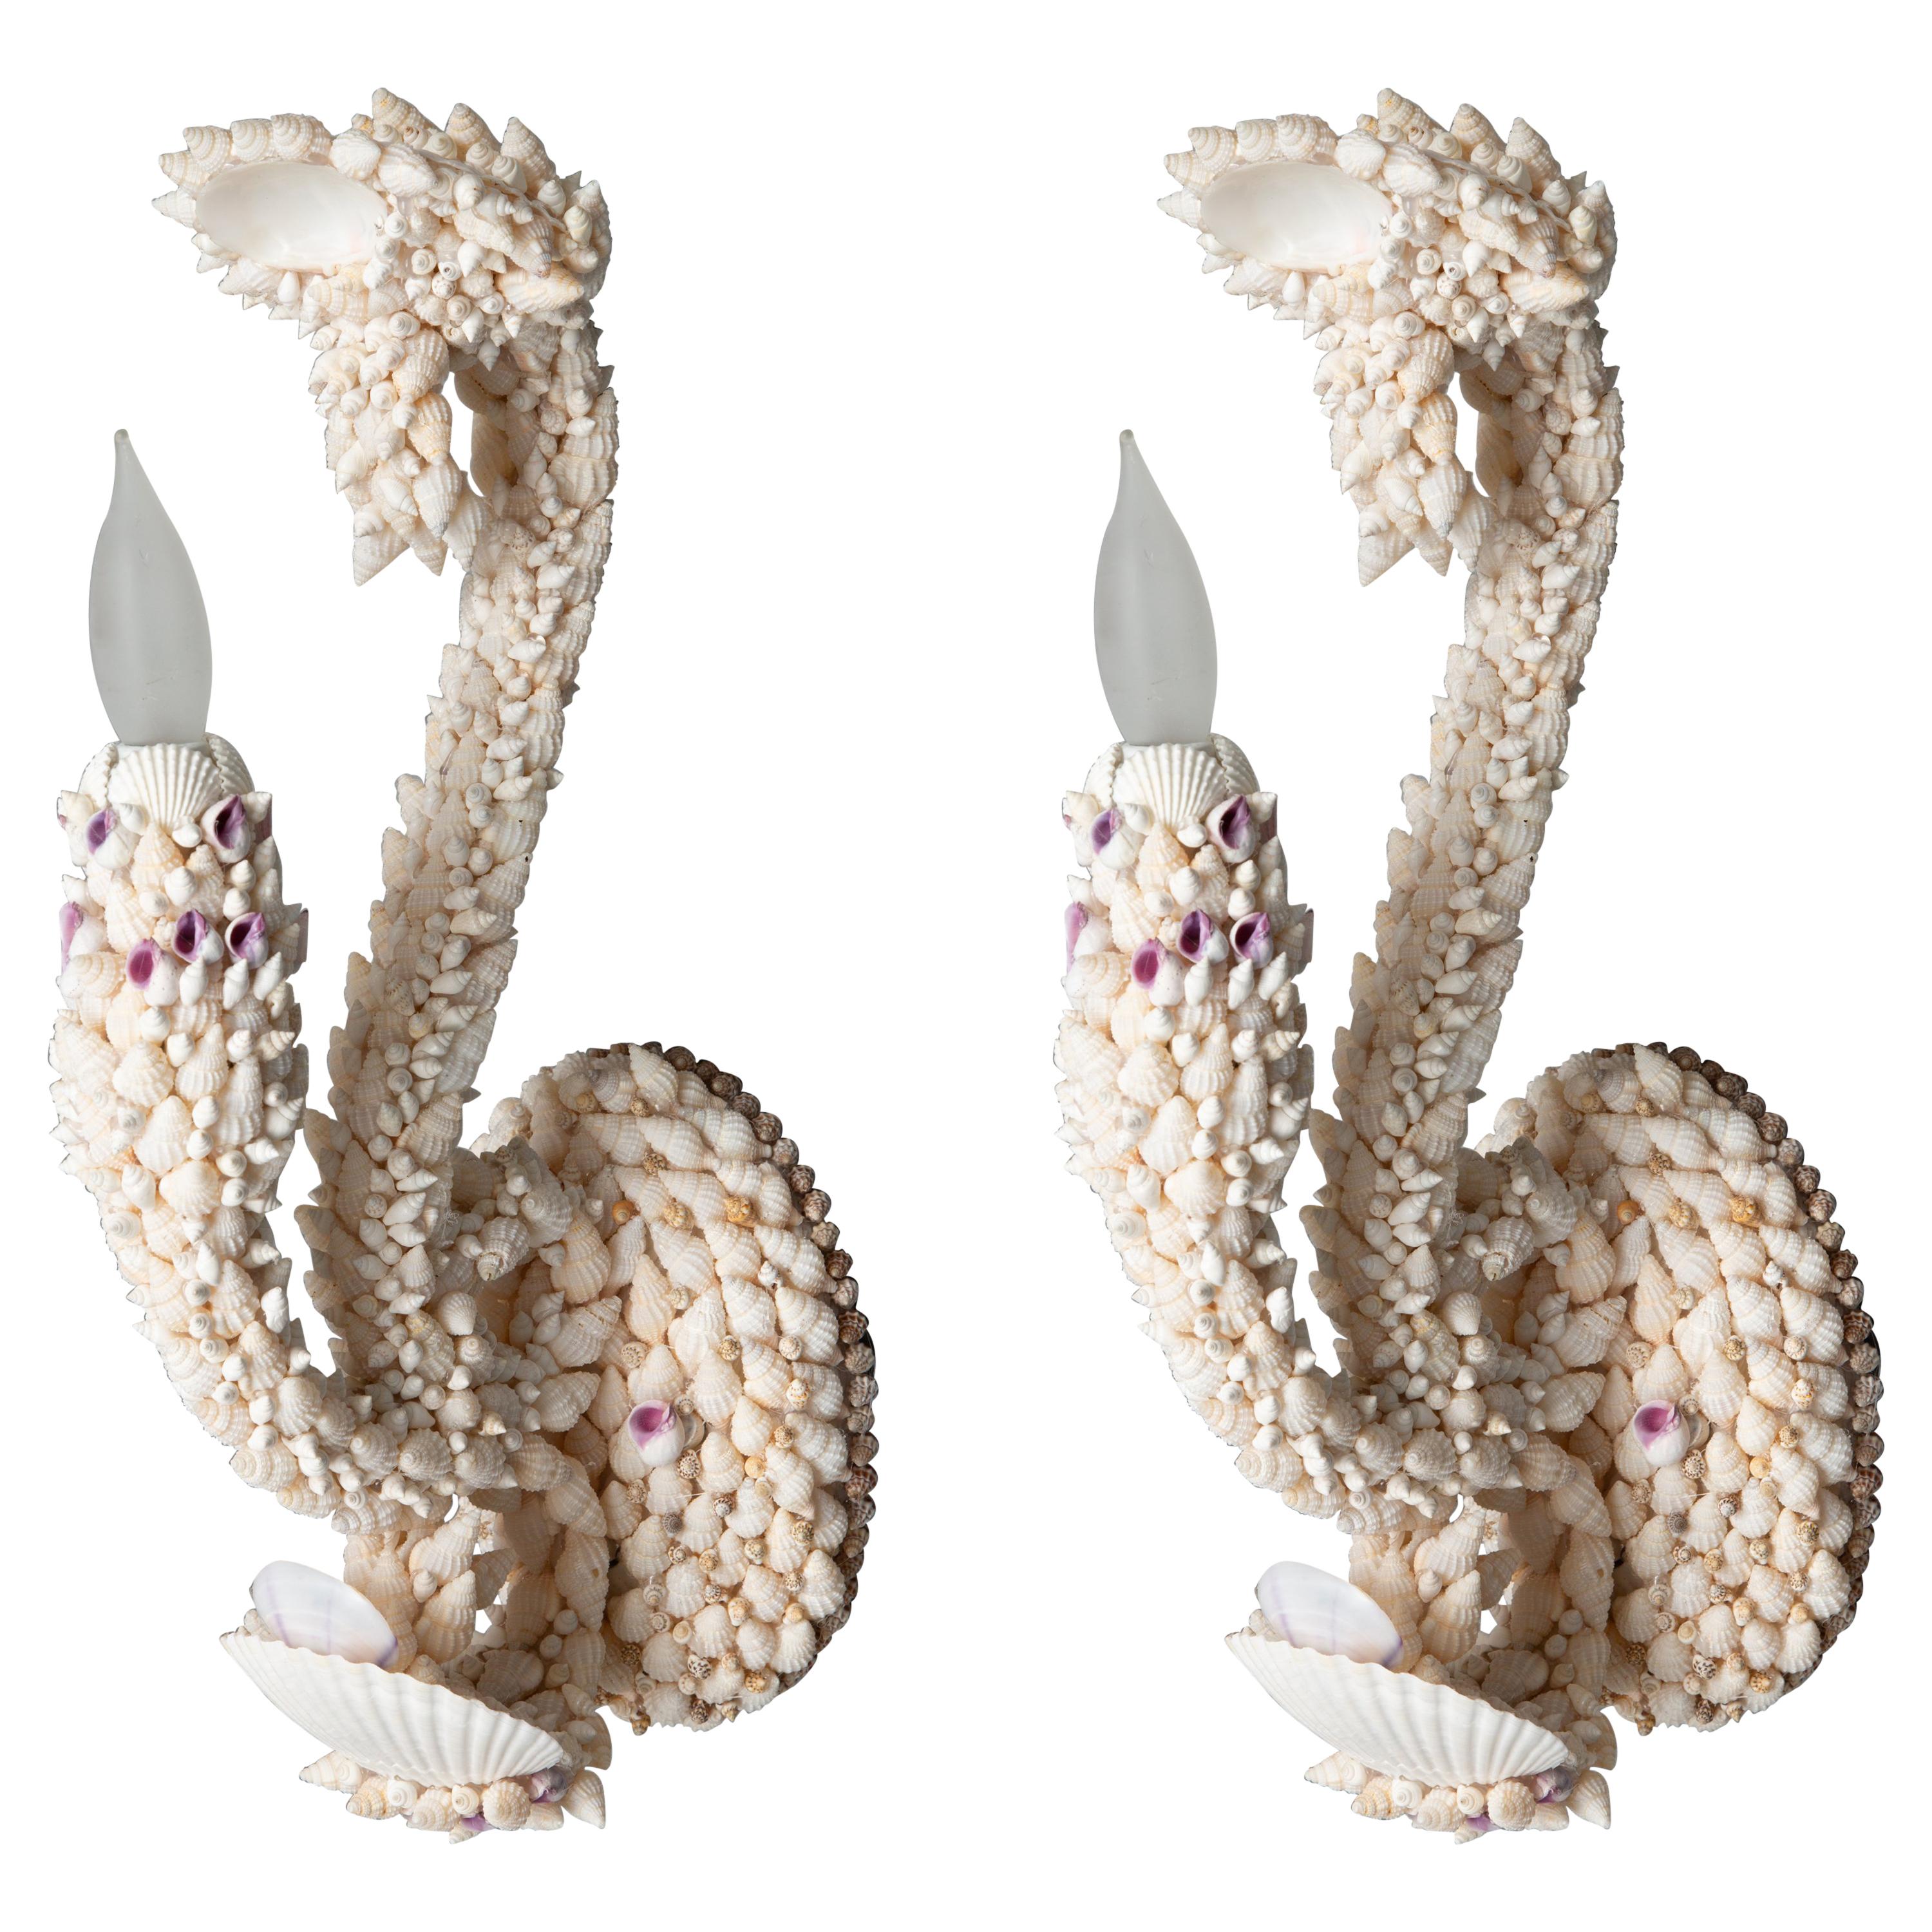 Pair of Shell Art Sconces